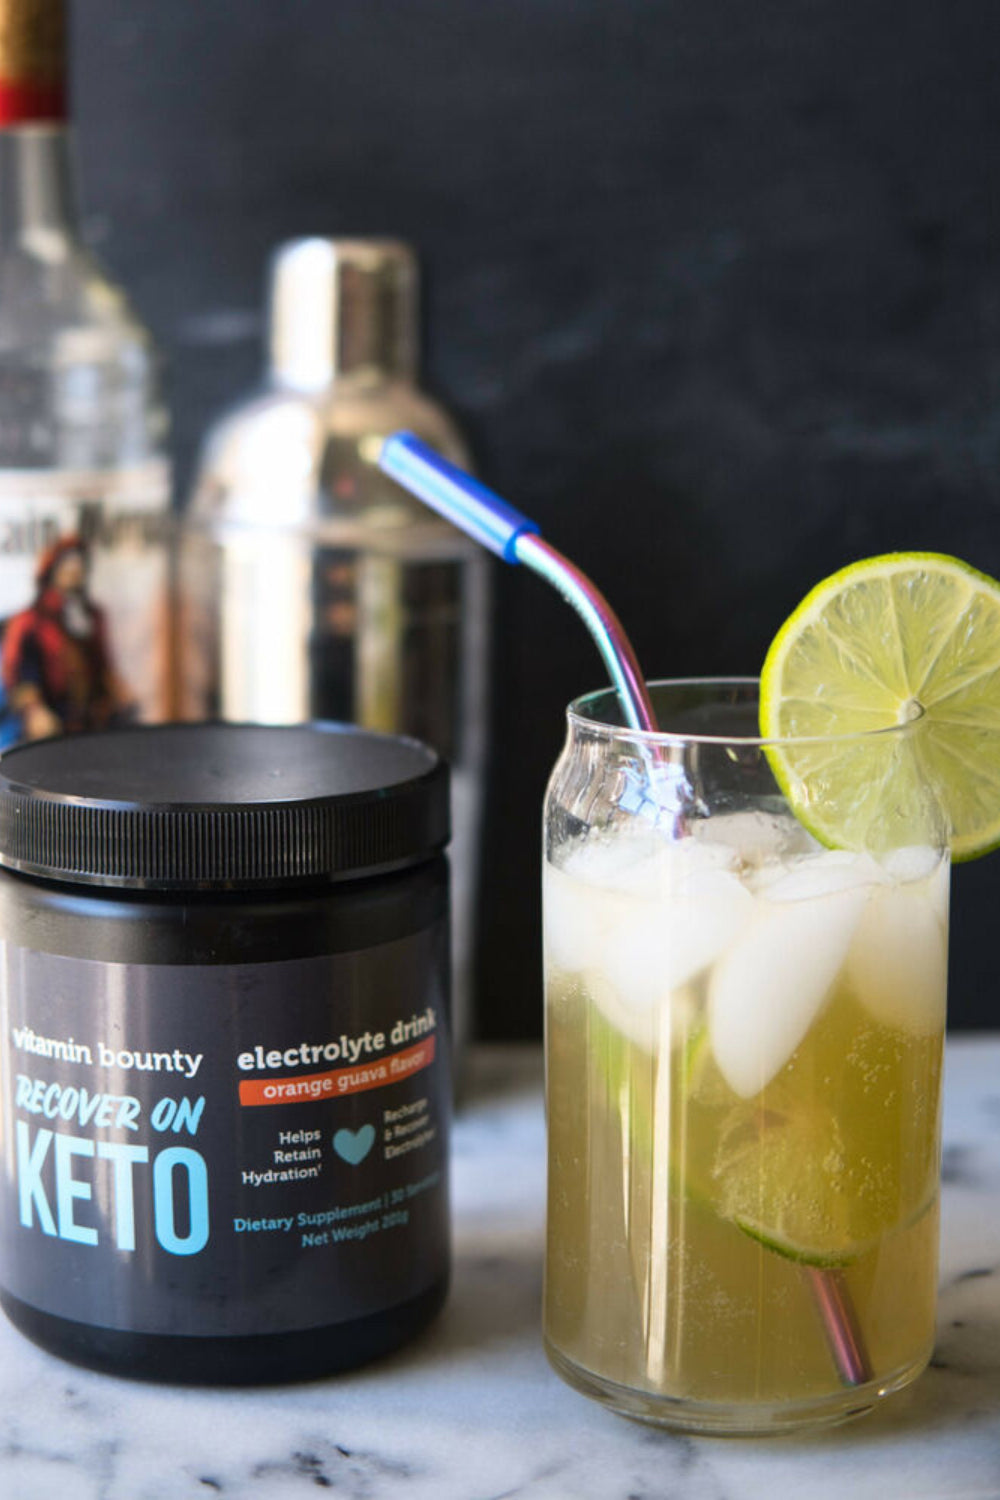 Orange, Guava, Lime & Rum Electrolyte Cocktail made with Recover on Keto by Vitamin Bounty